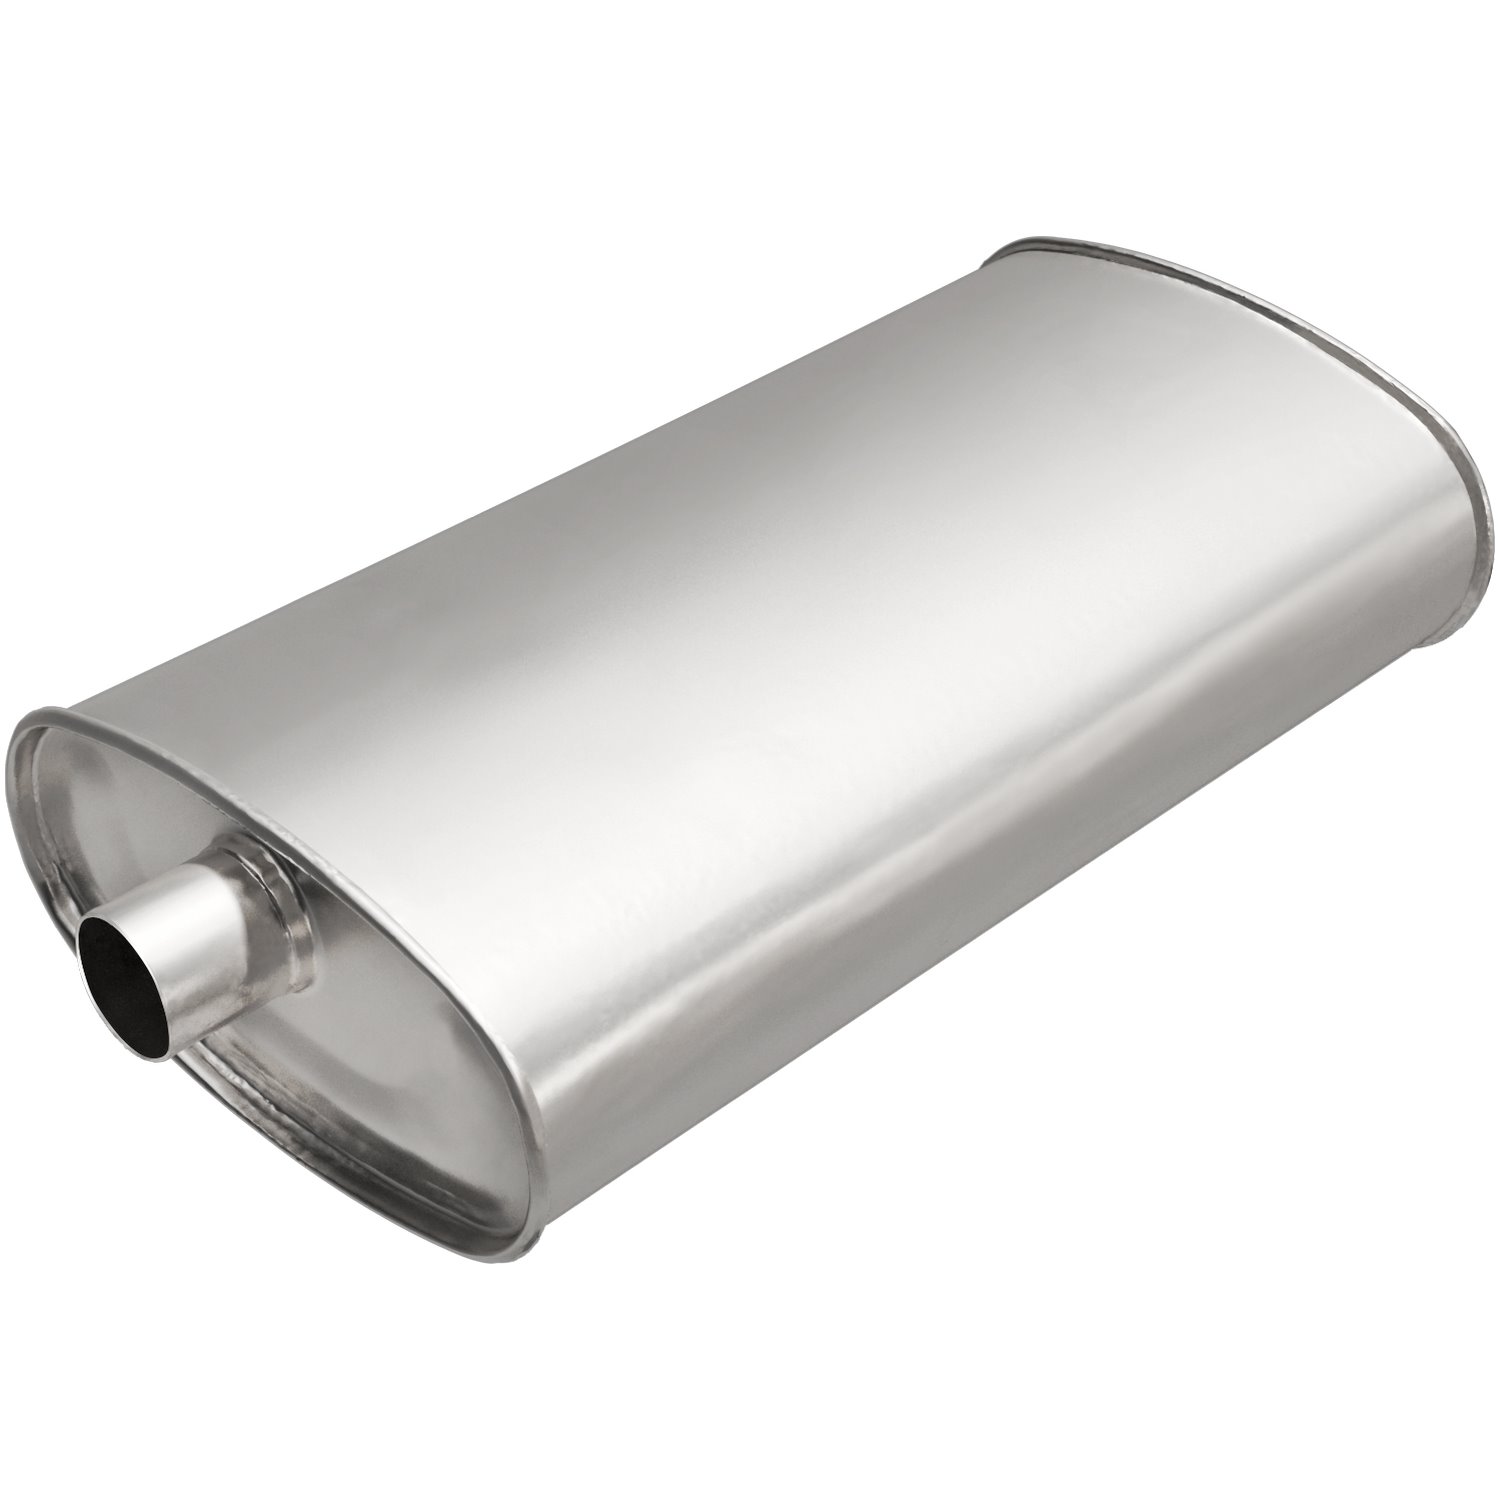 Direct-Fit Exhaust Muffler, 2006-2010 Ford Explorer Sport Trac, Mercury Mountaineer 4.0L